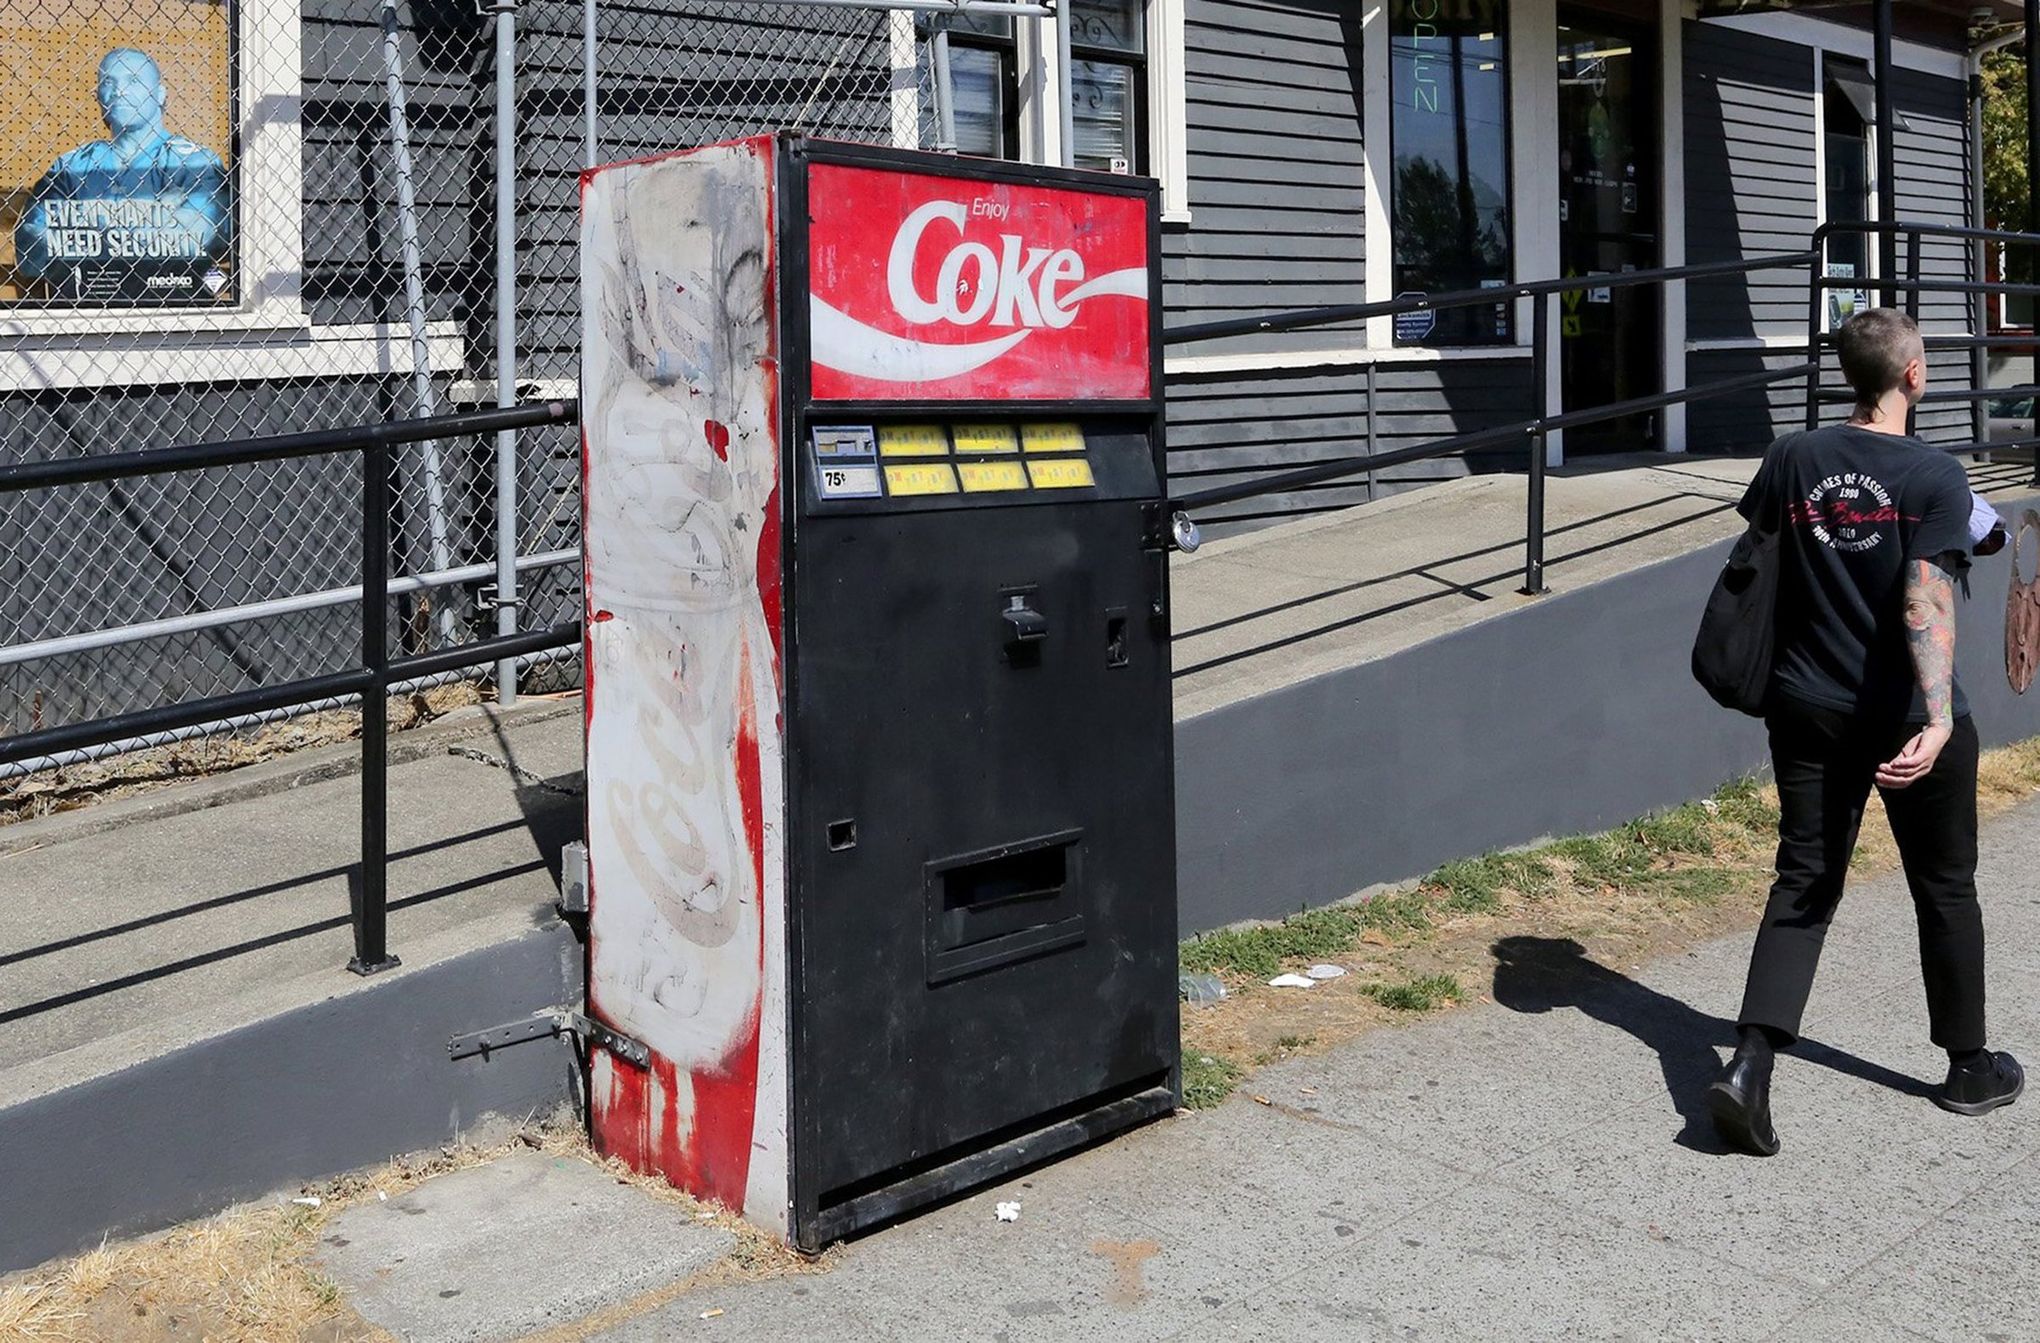 Where did it go? Capitol Hill's mystery soda machine disappears